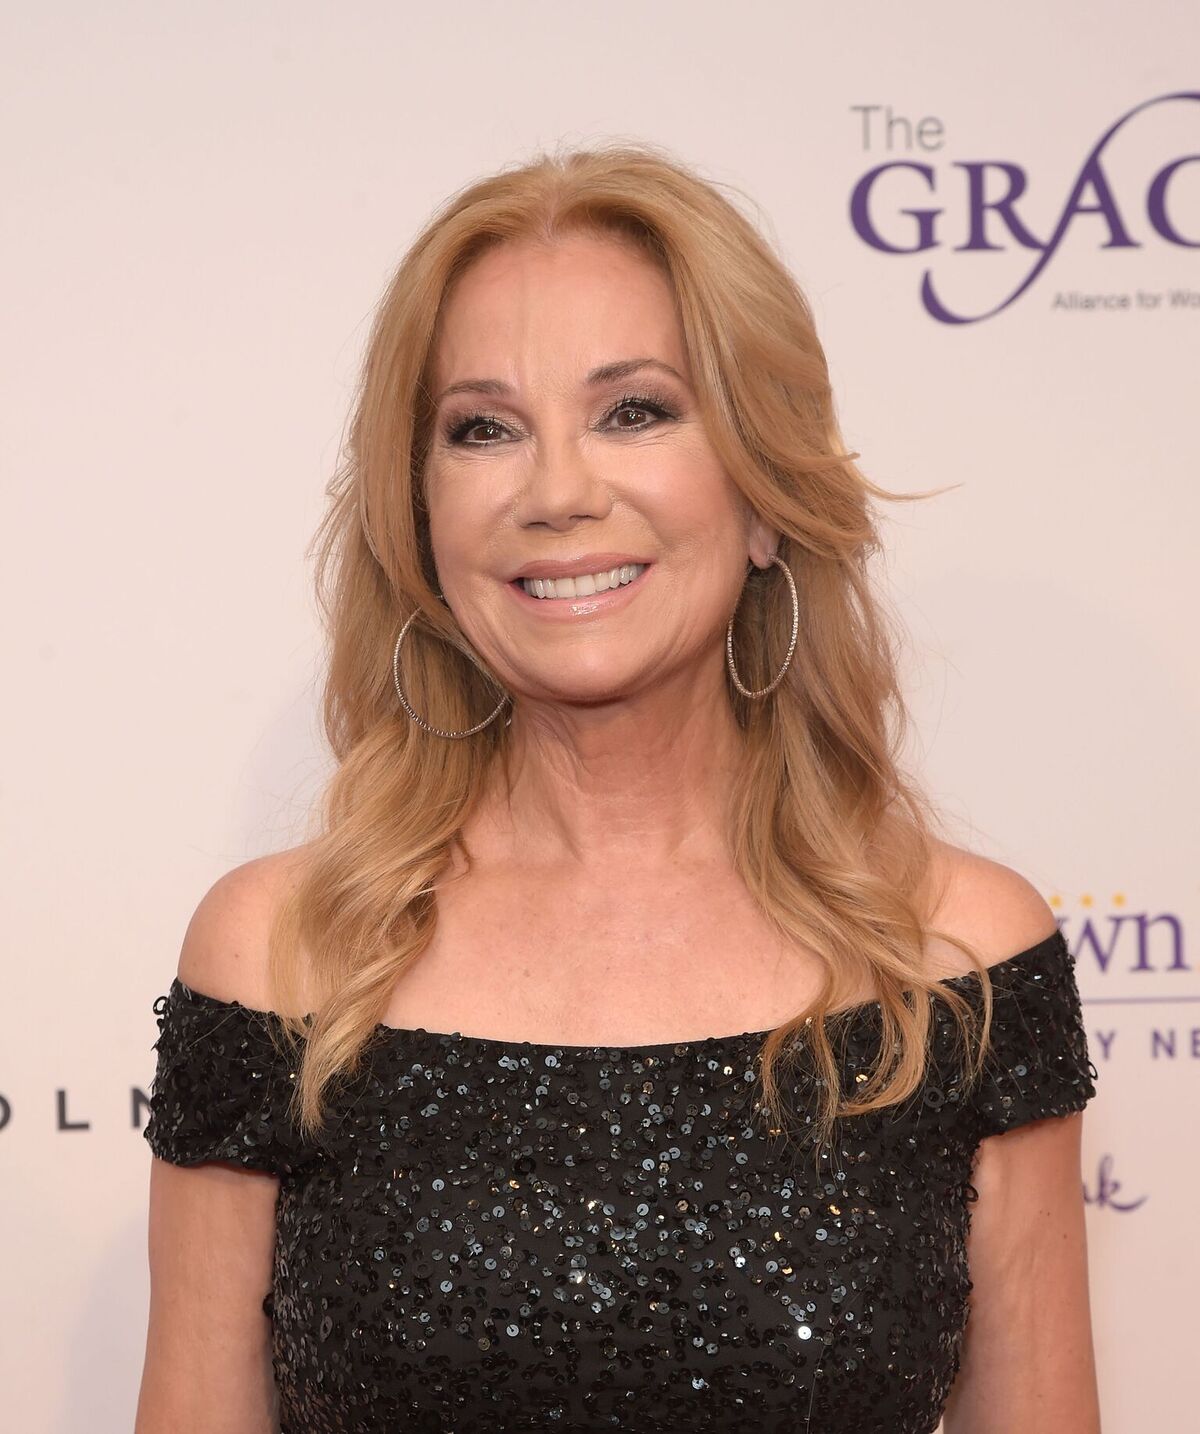 Kathie Lee Gifford attends the 41st Annual Gracie Awards Gala at the Beverly Wilshire Four Seasons Hotel on May 24, 2016 in Beverly Hills, California | Photo: Getty Images